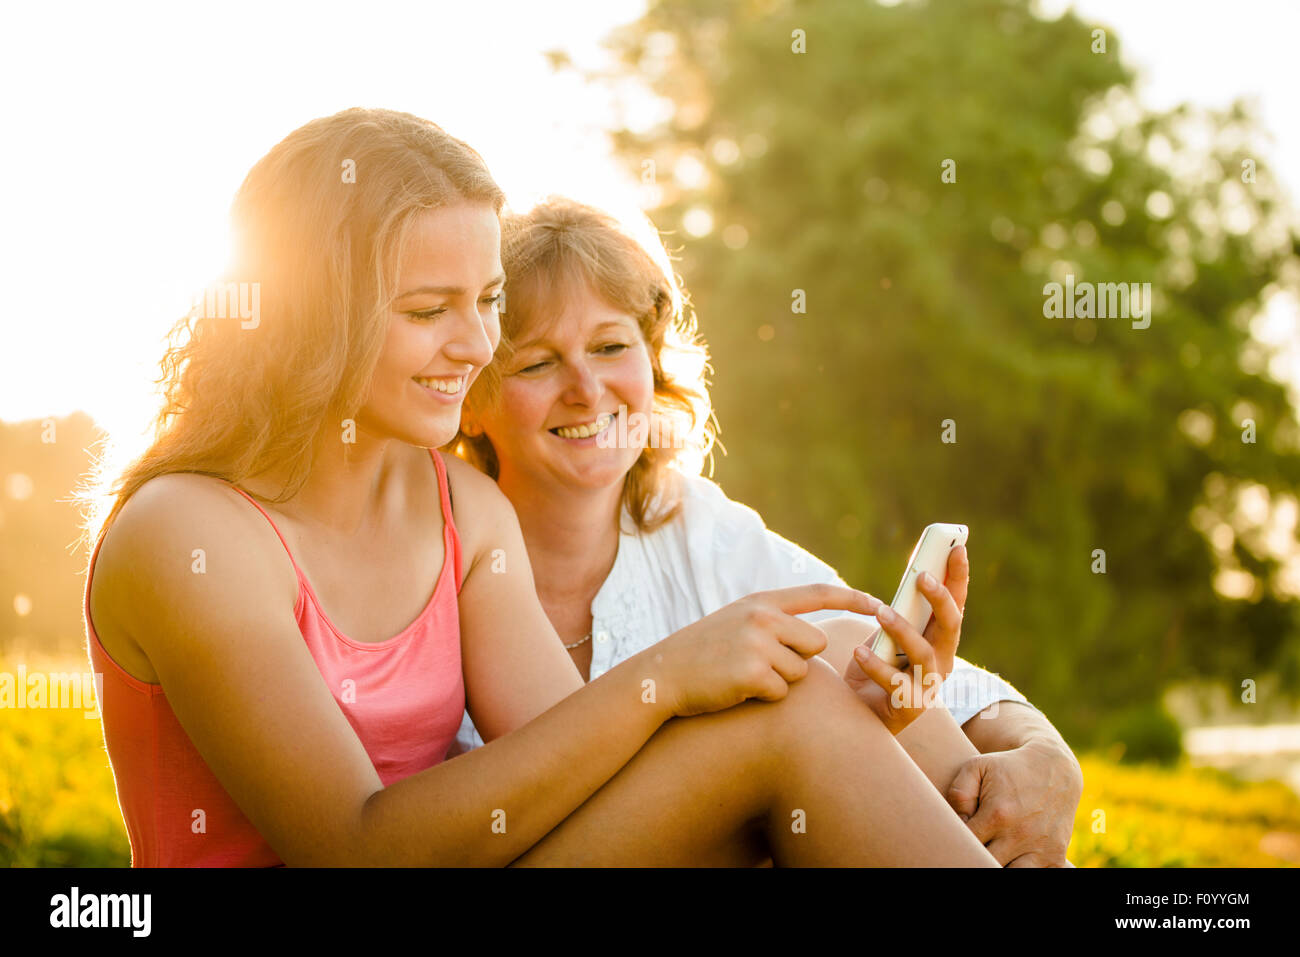 Teenage girl showing her mother photos on mobile phone outdoor in nature with setting sun in background Stock Photo